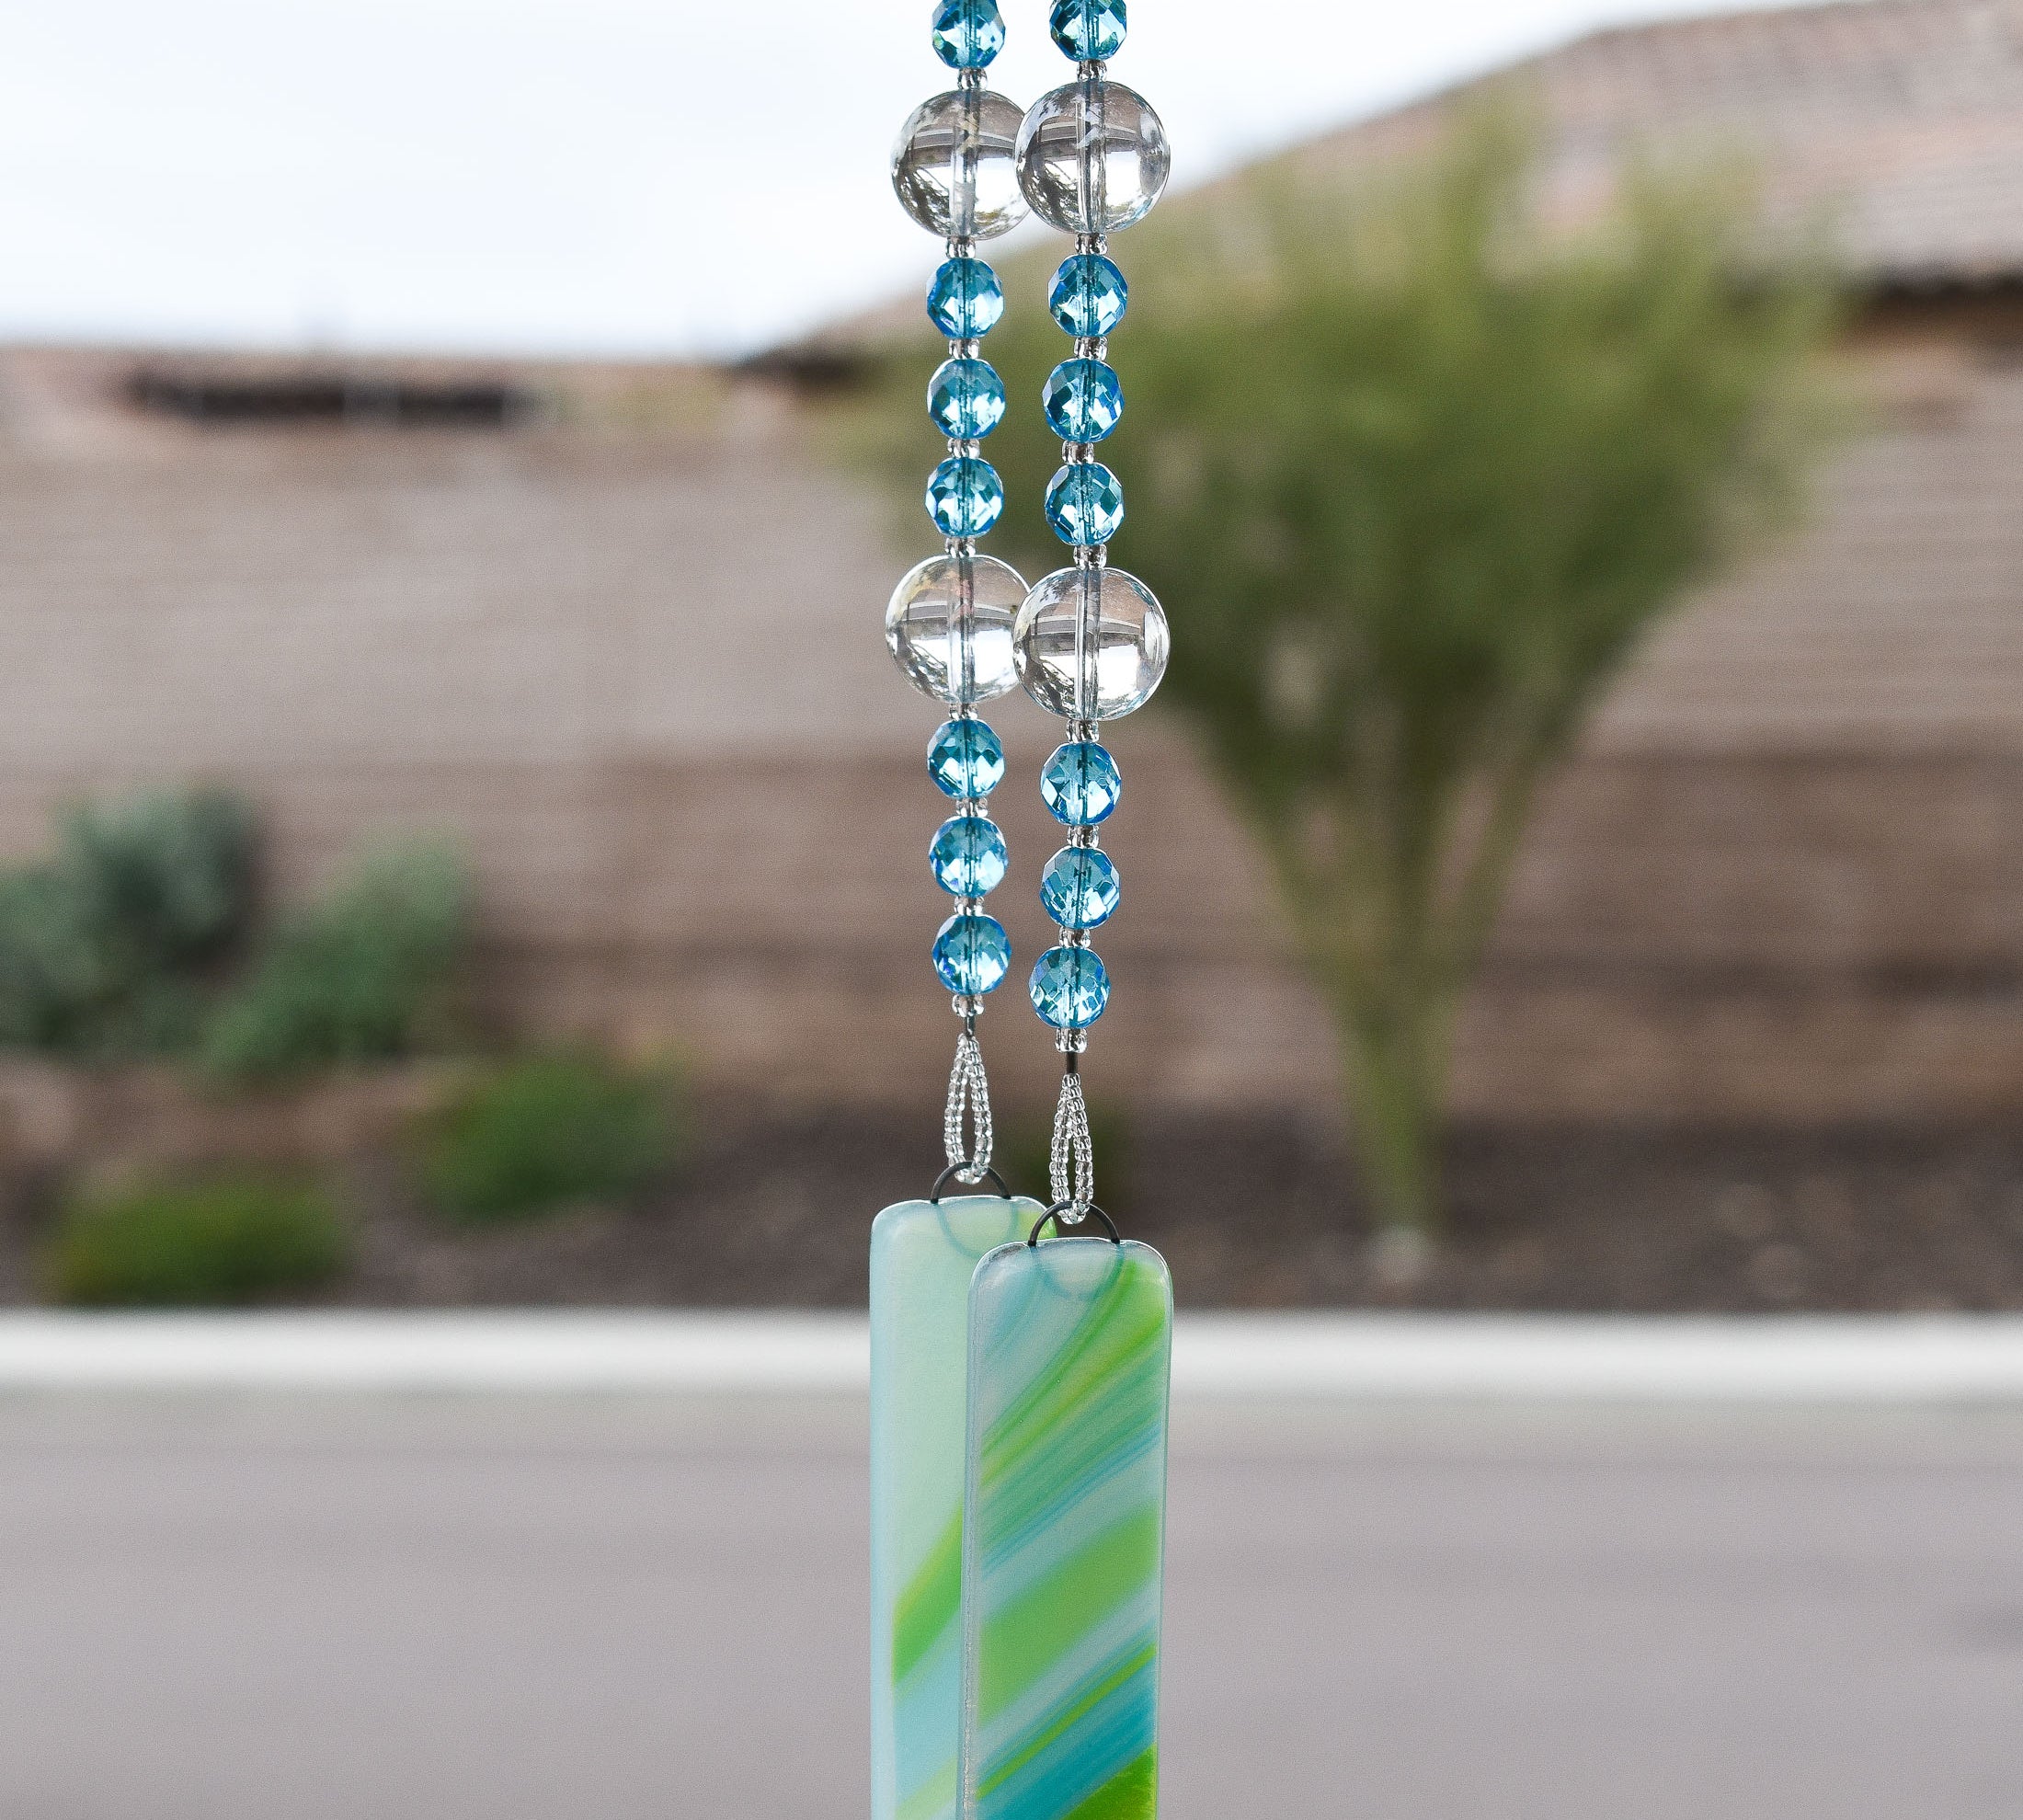 light turquoise glass beads strung with large clear glass lampworked beads, anchored by two piece of blue and green fused glass, hanging vertically 